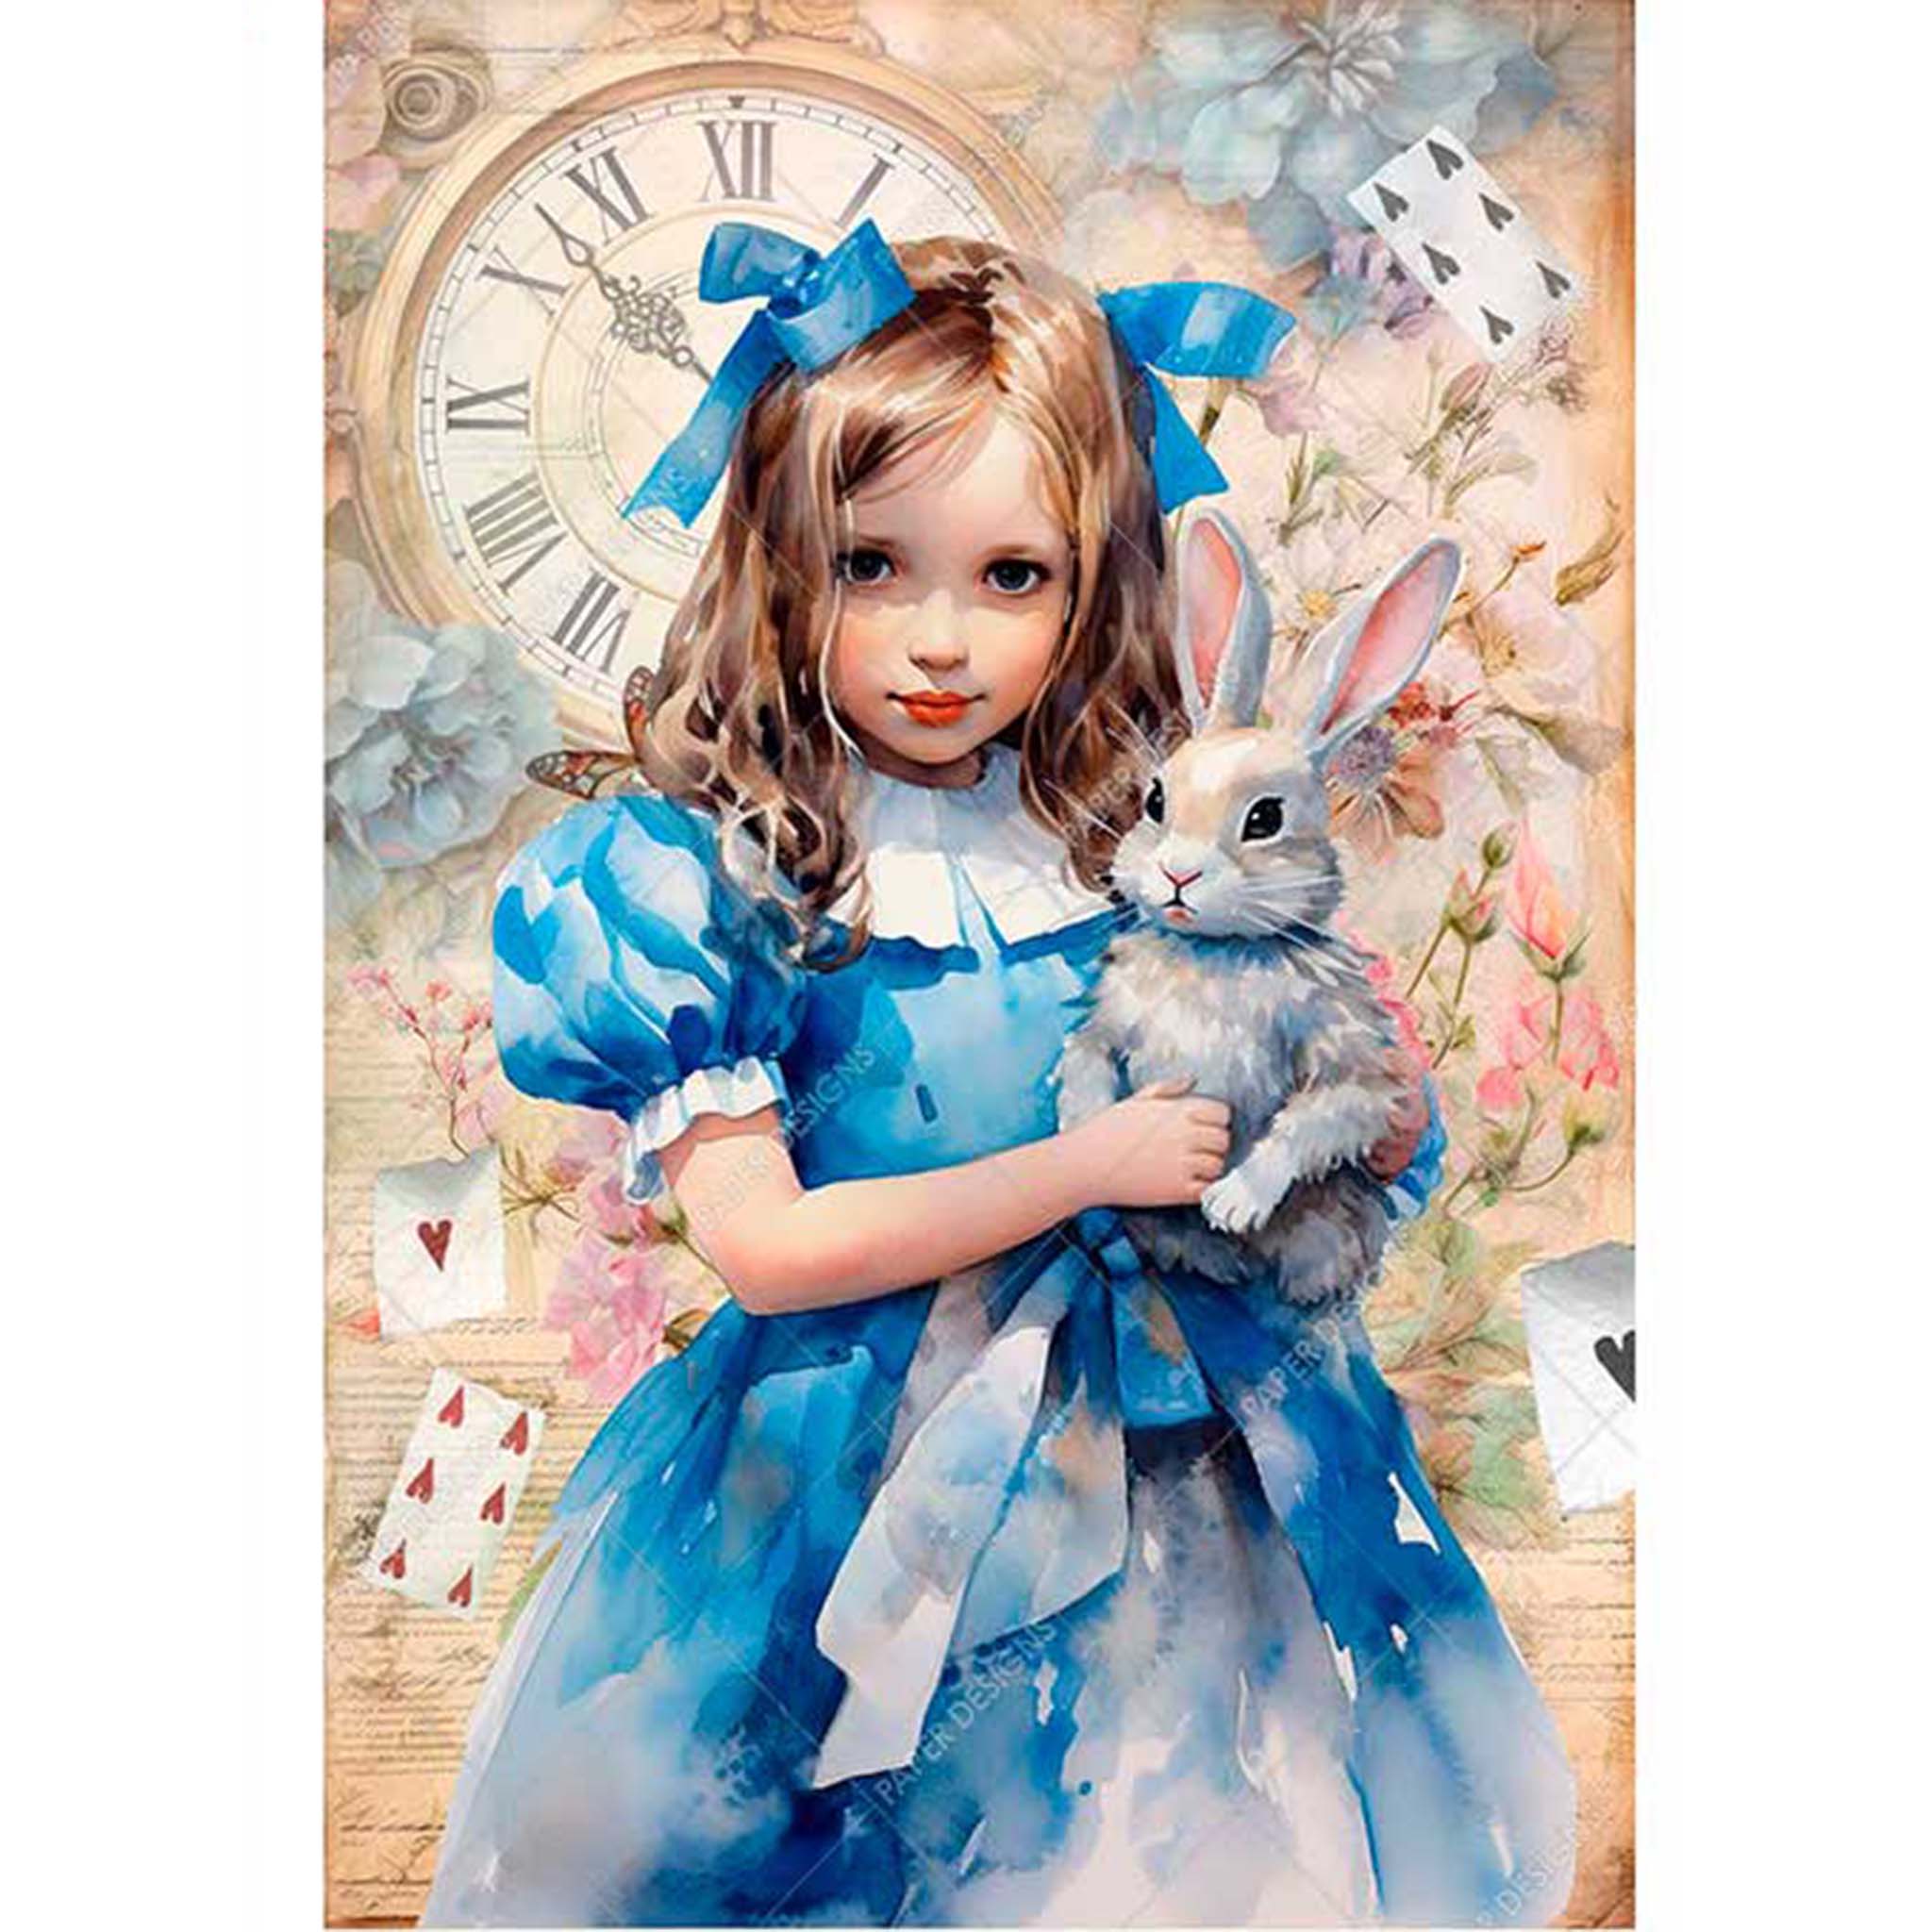 A2 rice paper design featuring a young Alice holding a white rabbit in front of a background filled with Alice In Wonderland themed items. White borders are on the sides.